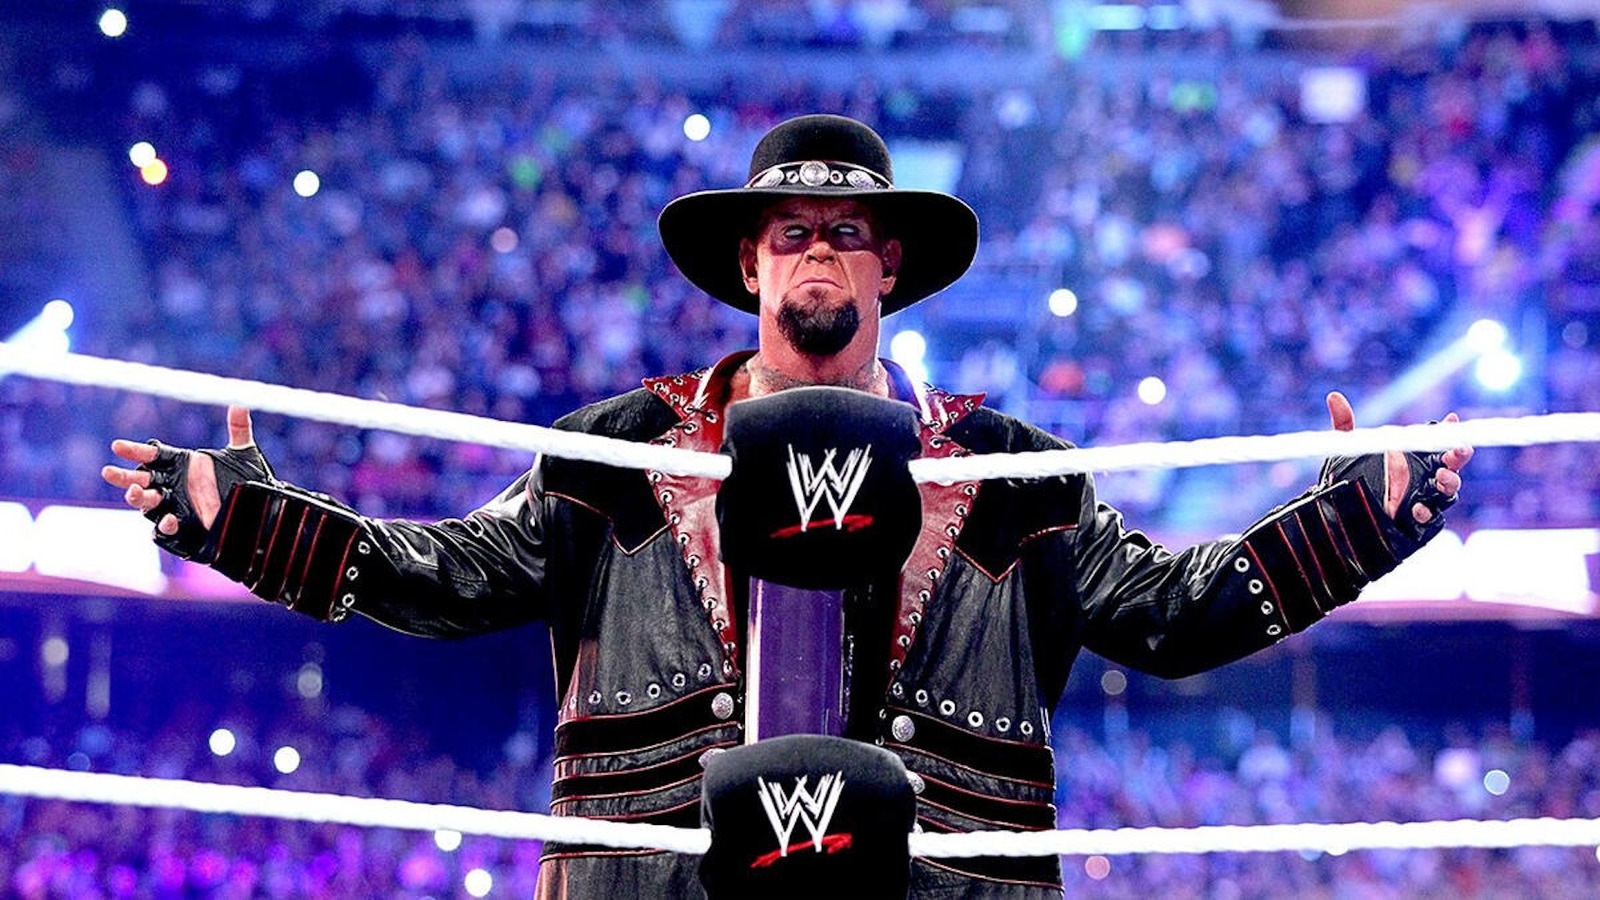 Bully Ray & Mark Henry Discuss WWE Legend The Undertaker As A 'Benevolent Leader'